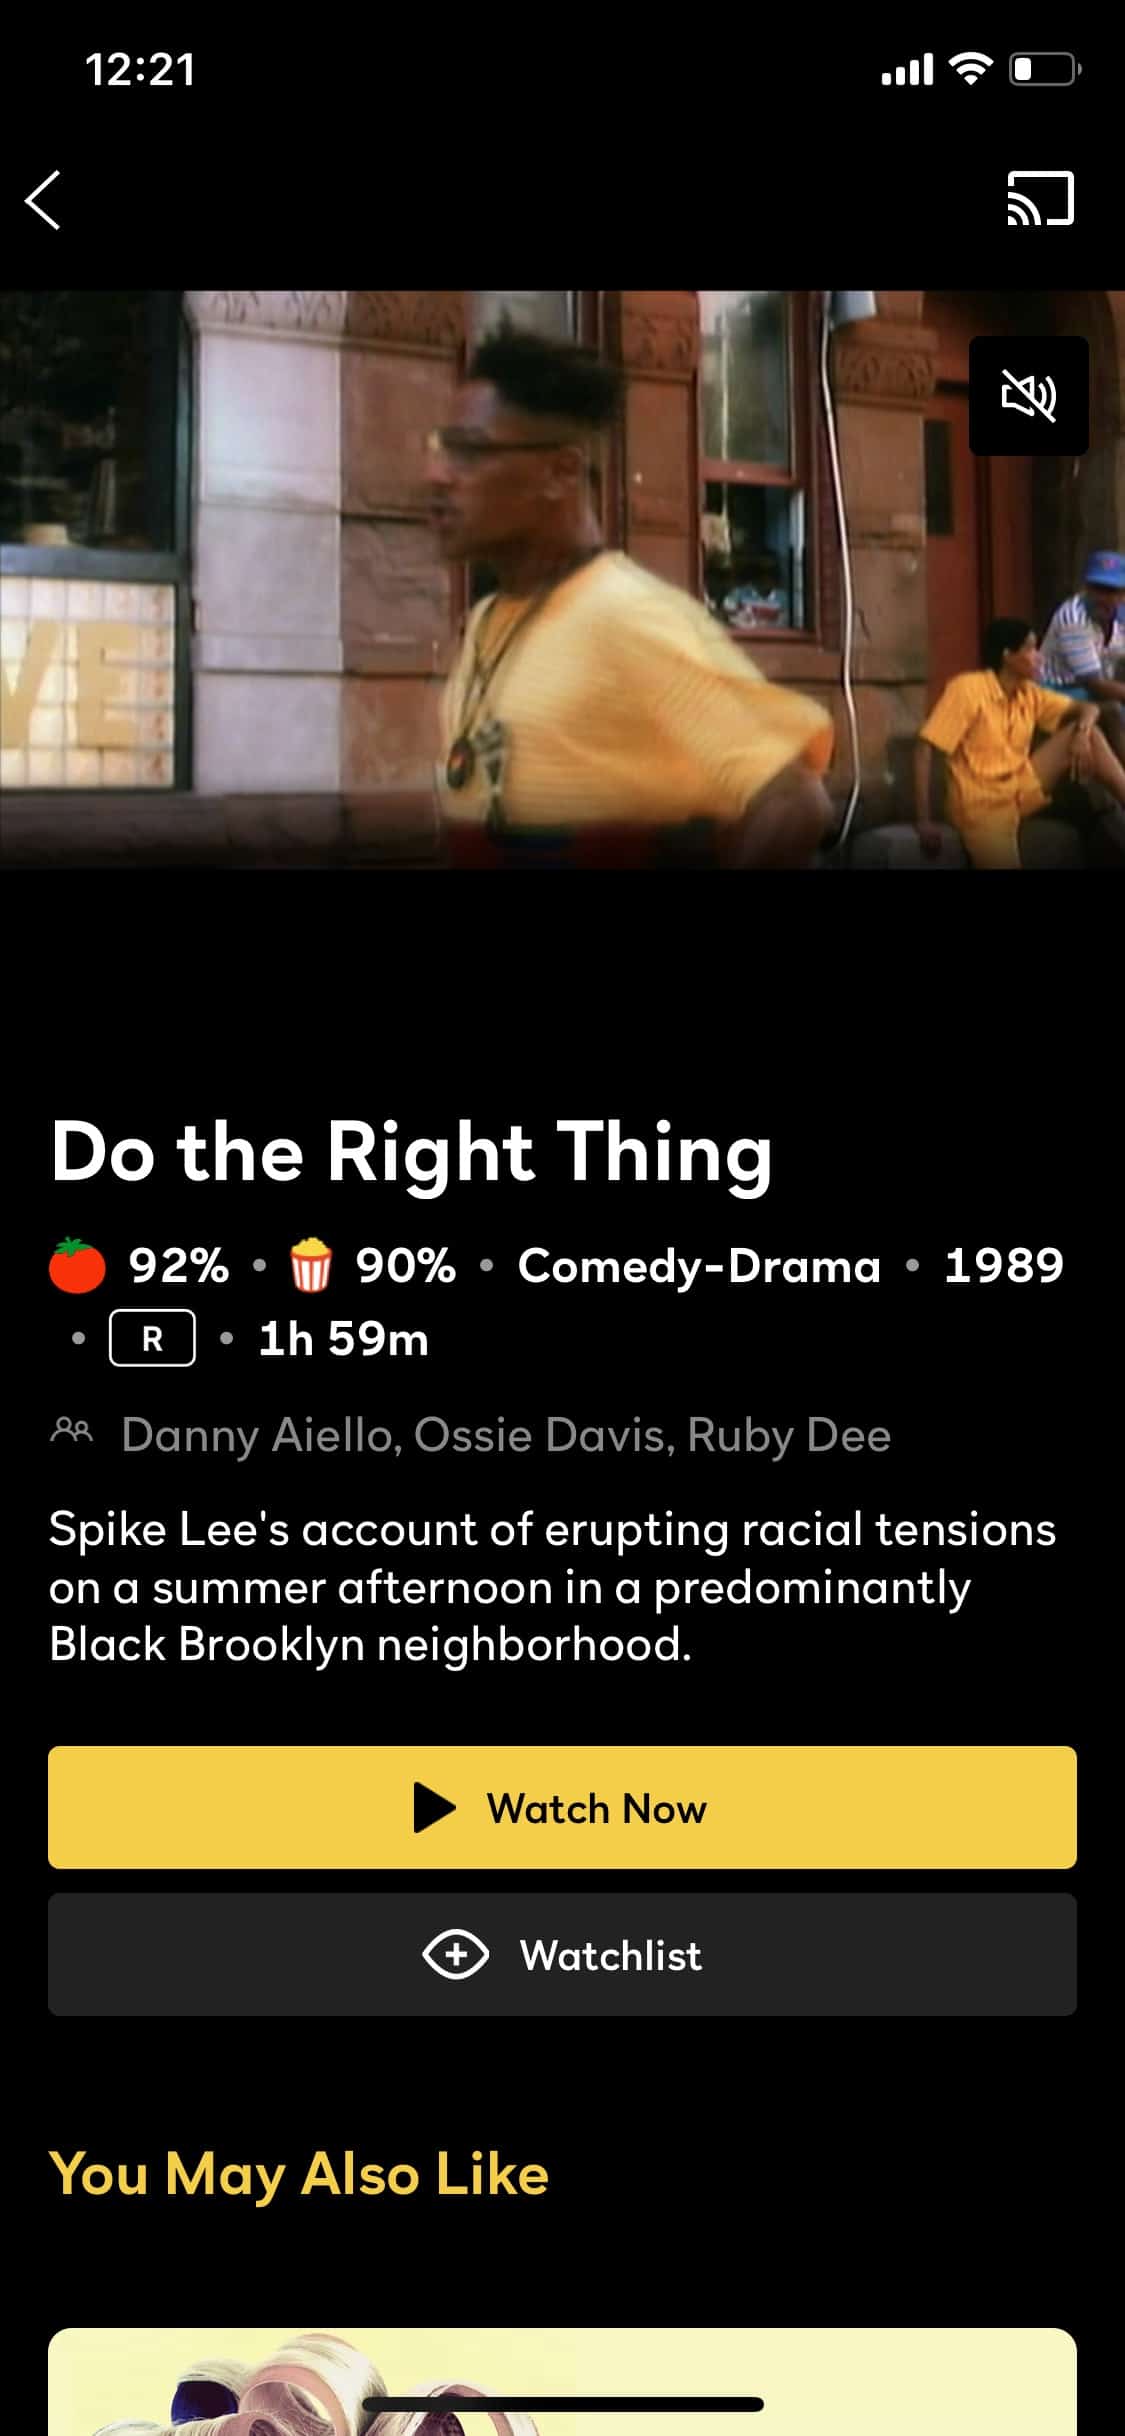 Peacock offers movies like Do the Right Thing (1989)